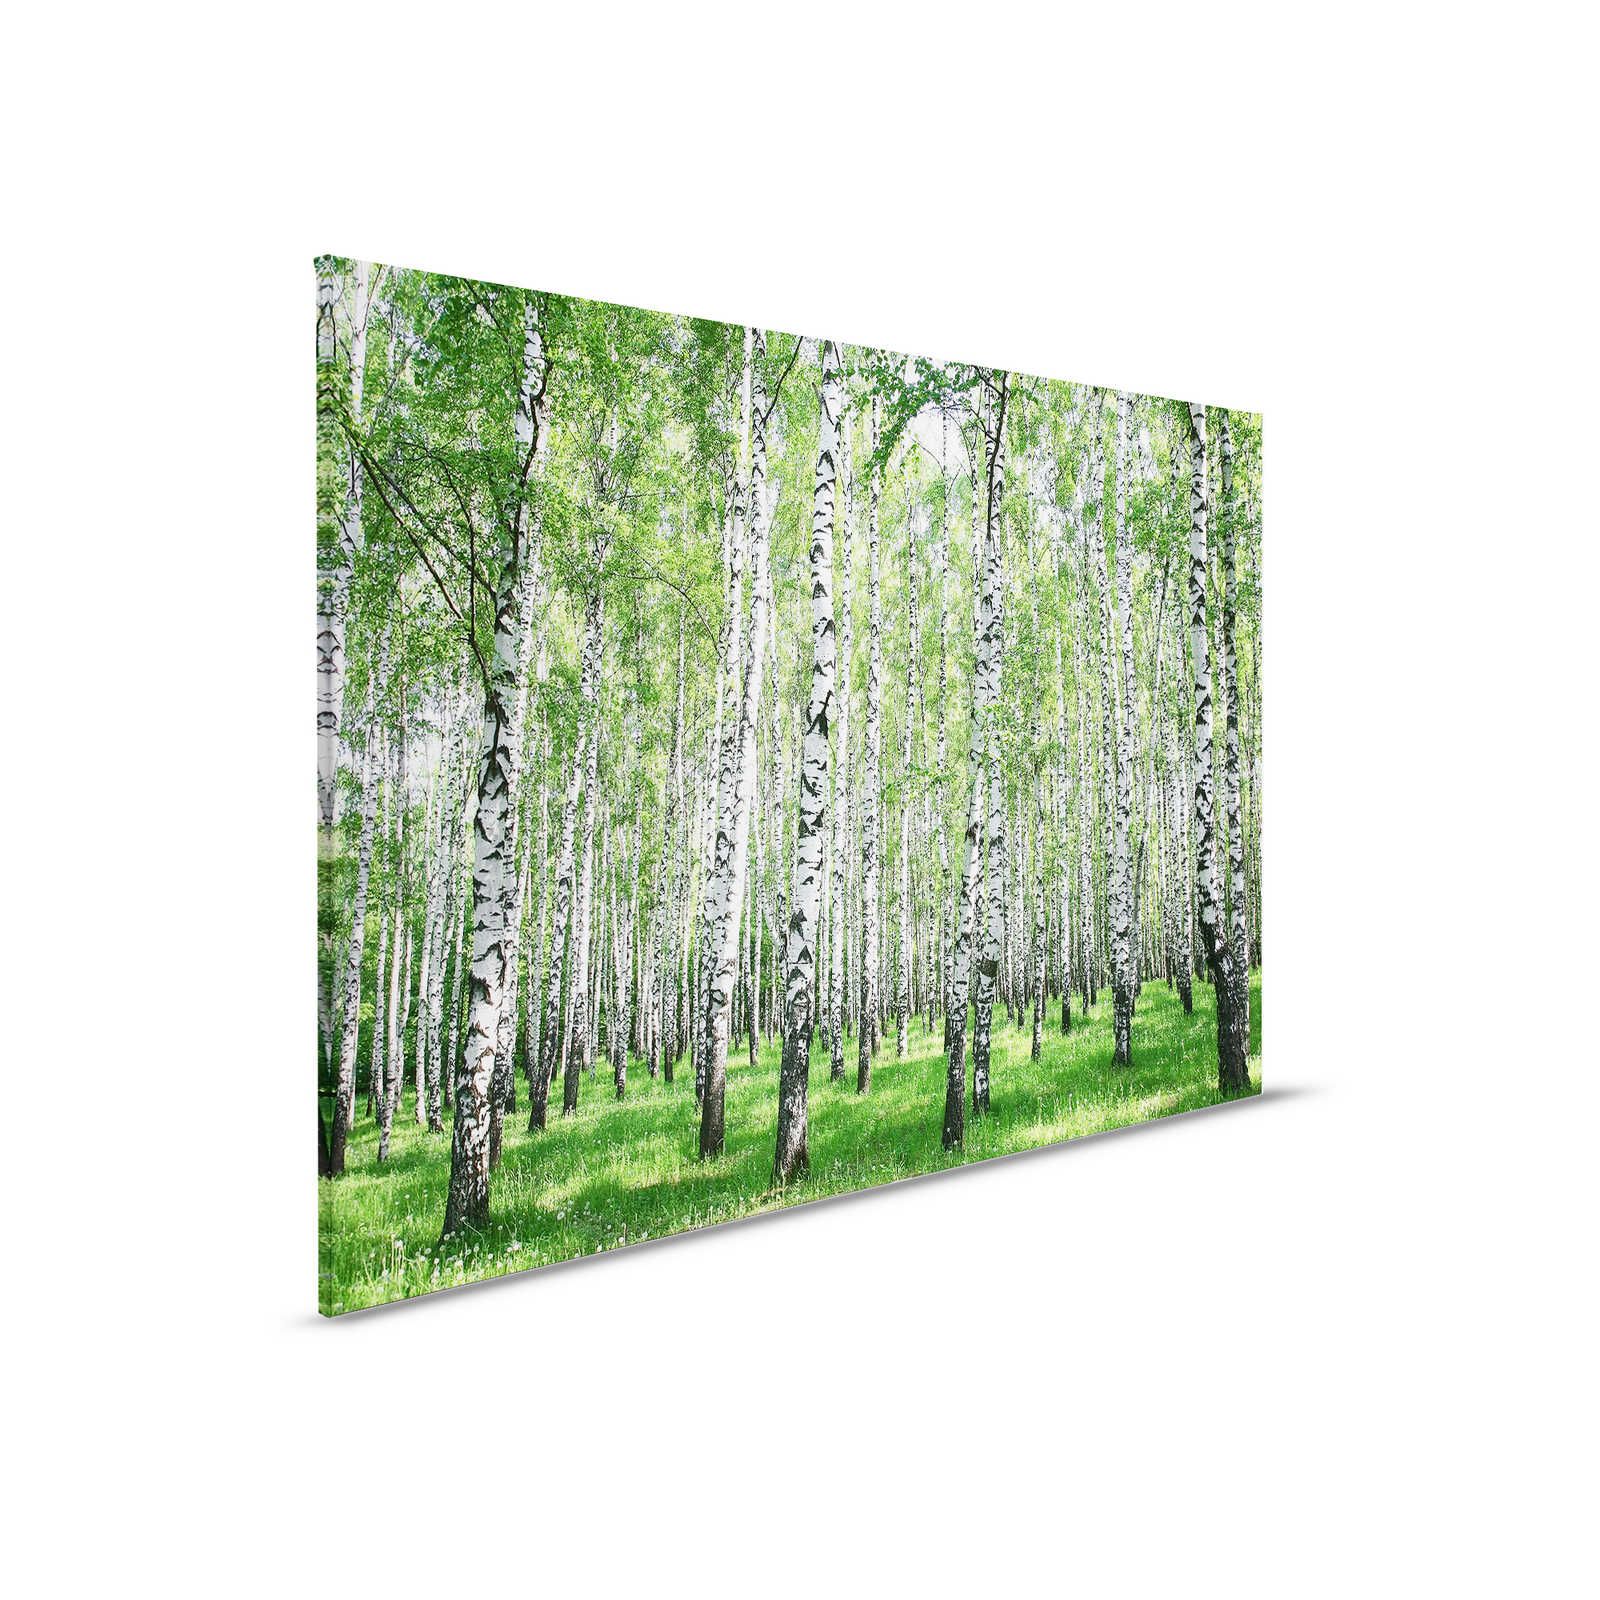         Canvas painting Landscape Birch Forest by Day - 0,90 m x 0,60 m
    